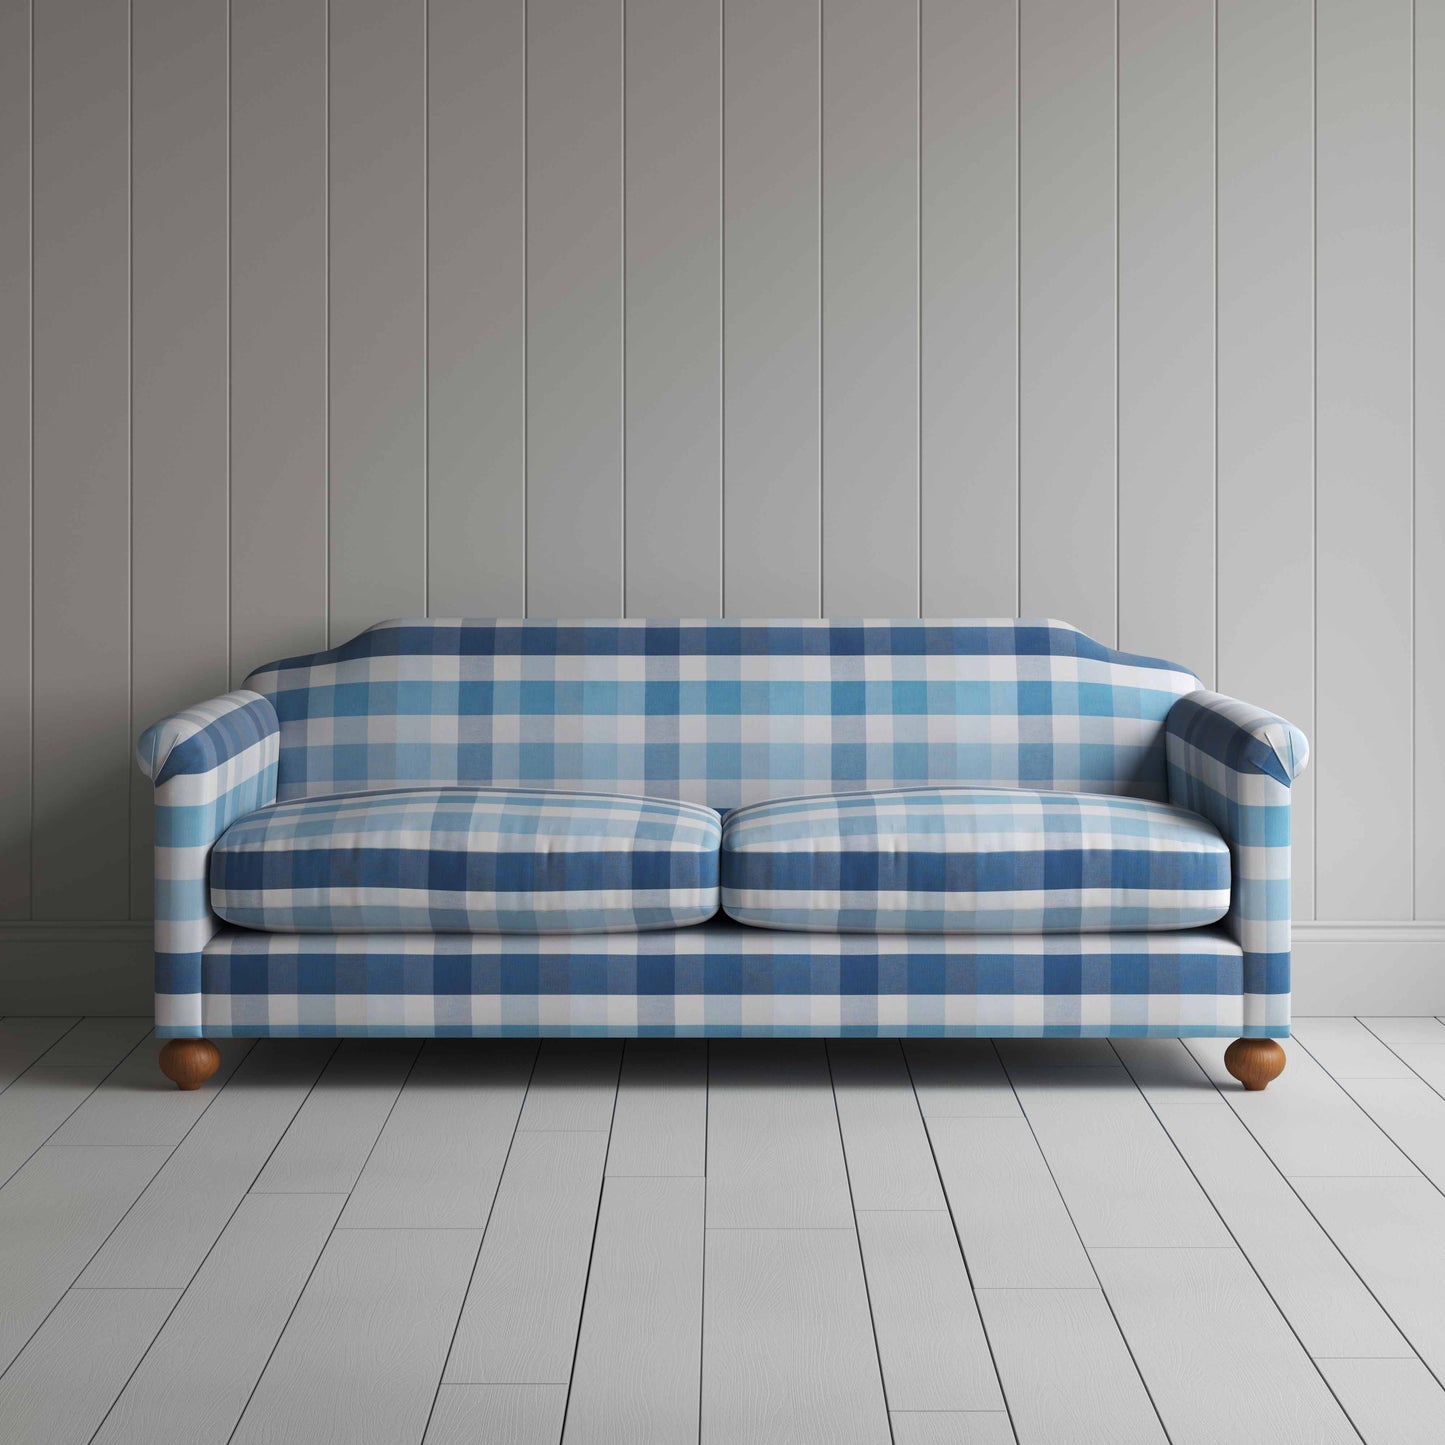 Dolittle 4 Seater Sofa in Checkmate Cotton, Blue